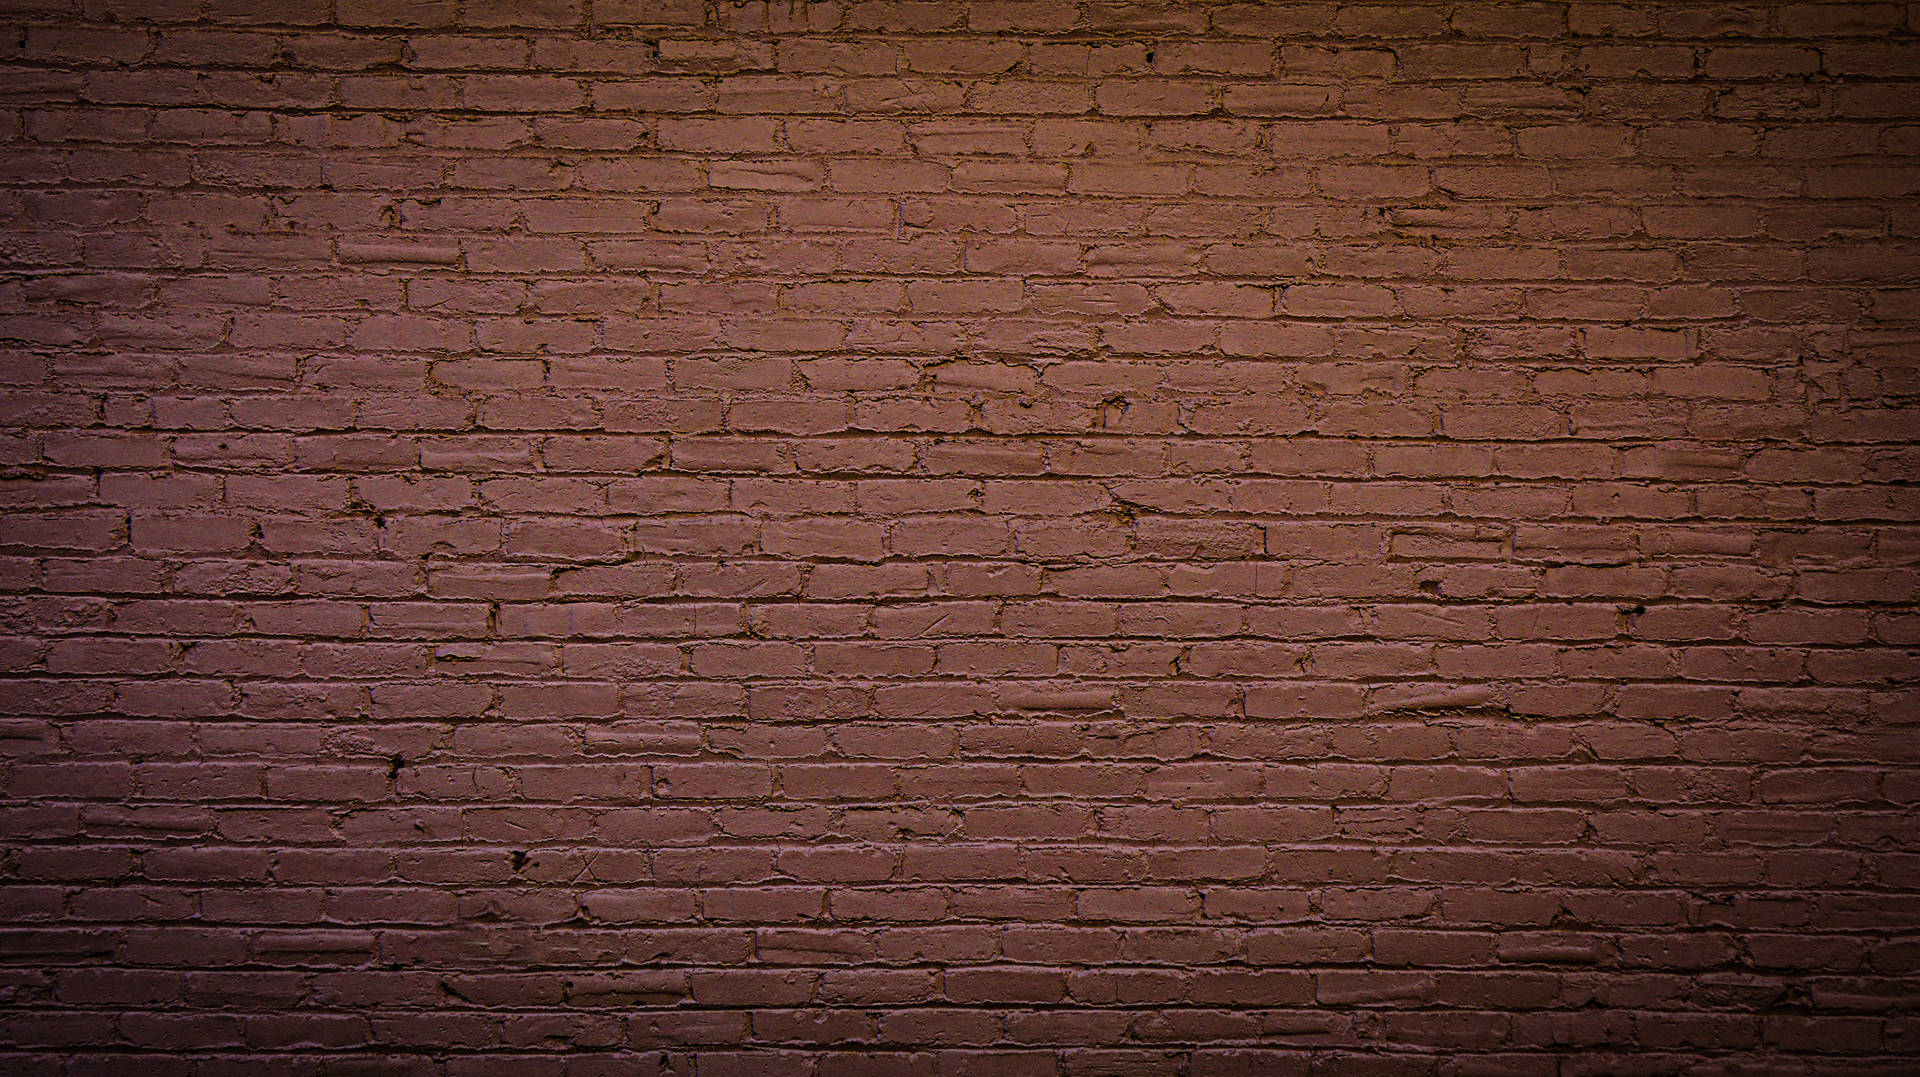 5403X3032 Brick Wallpaper and Background